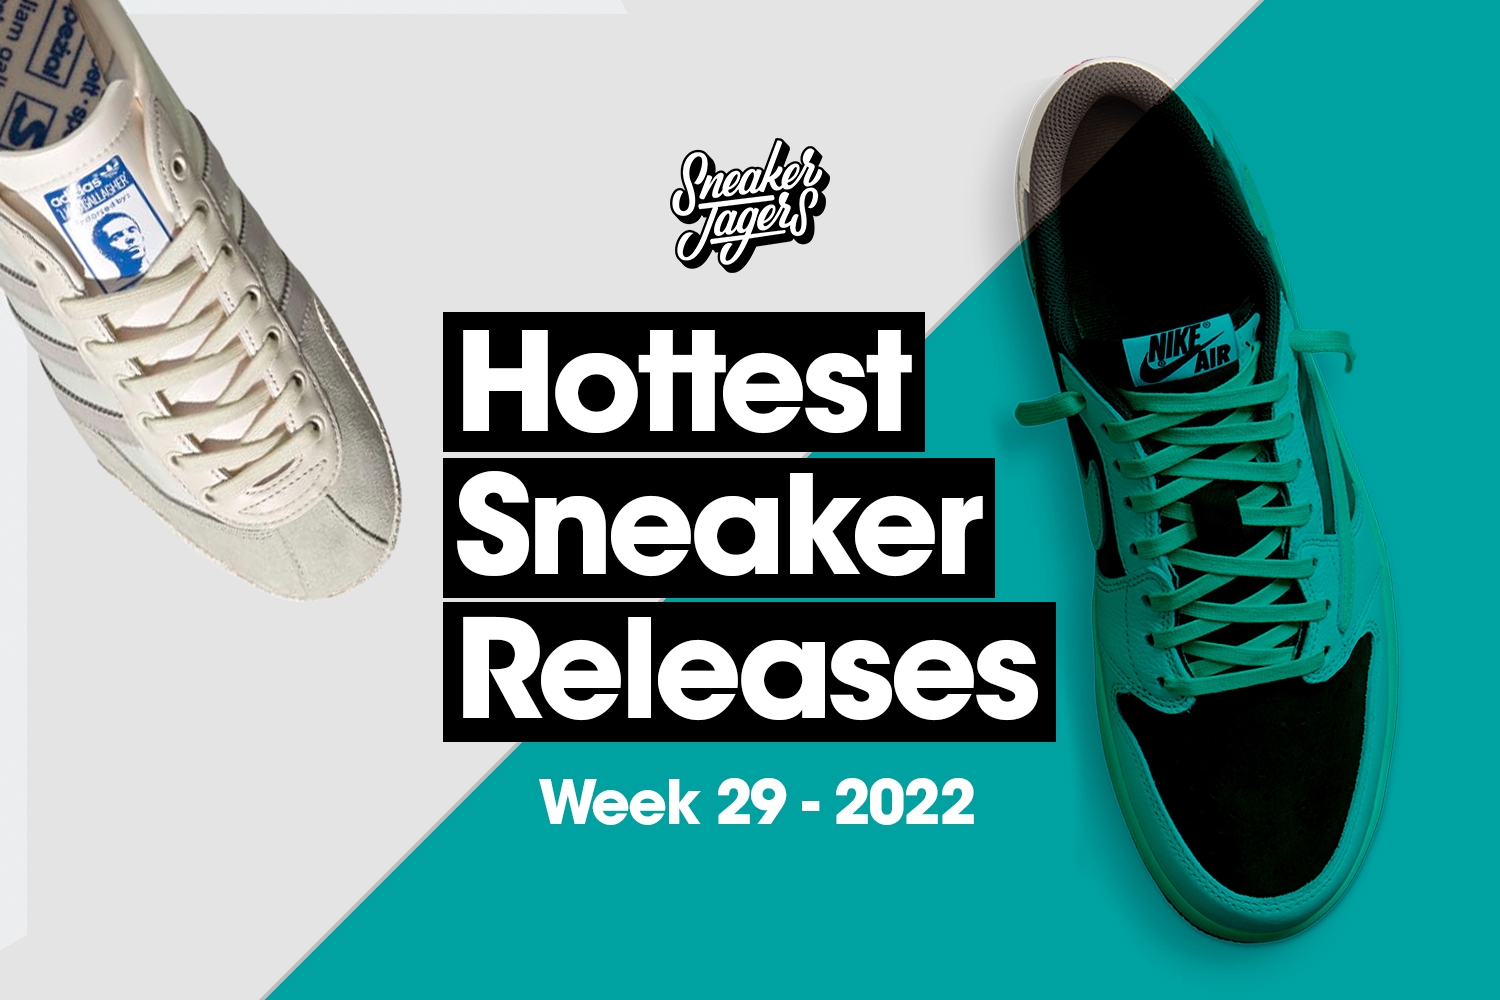 Hottest Sneaker Releases - WK 29